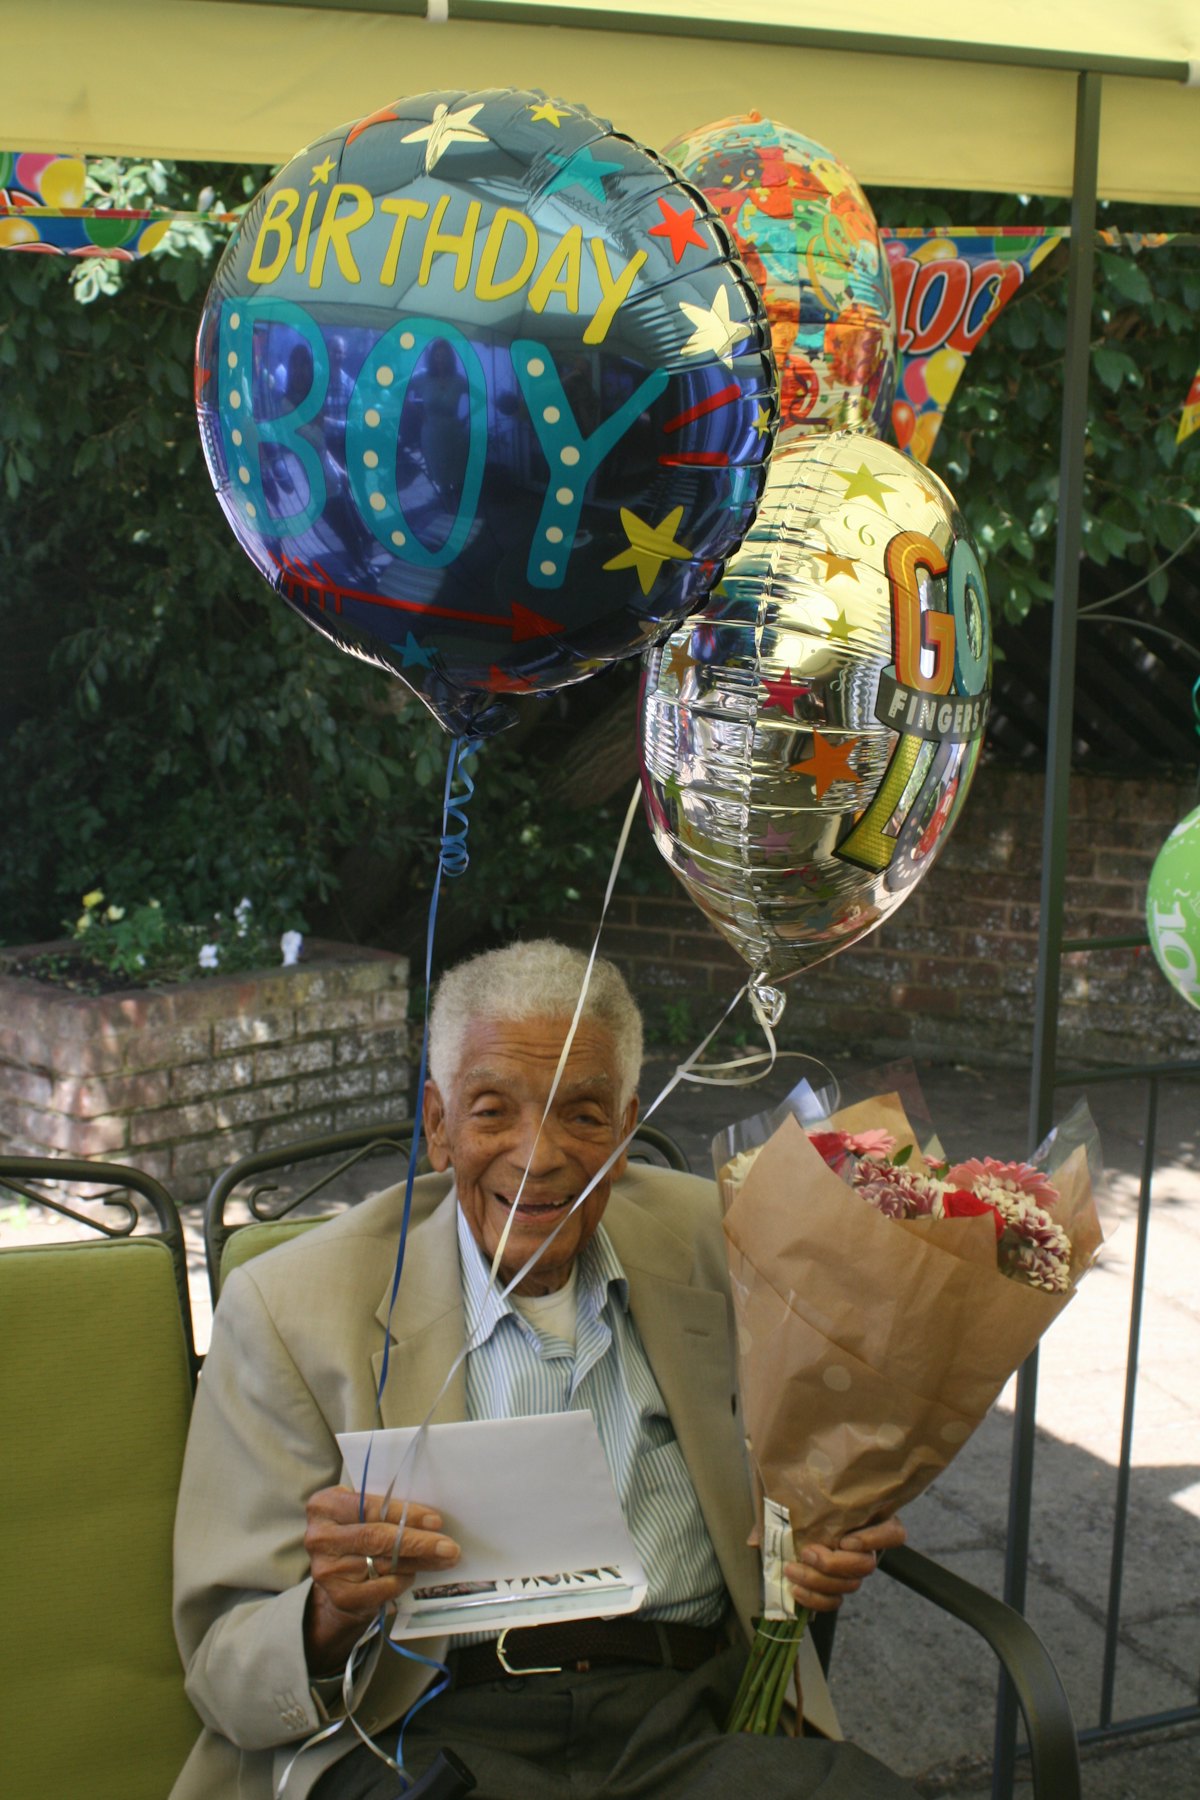 Earl Cameron celebrates his 100th birthday on 8 August 2017.